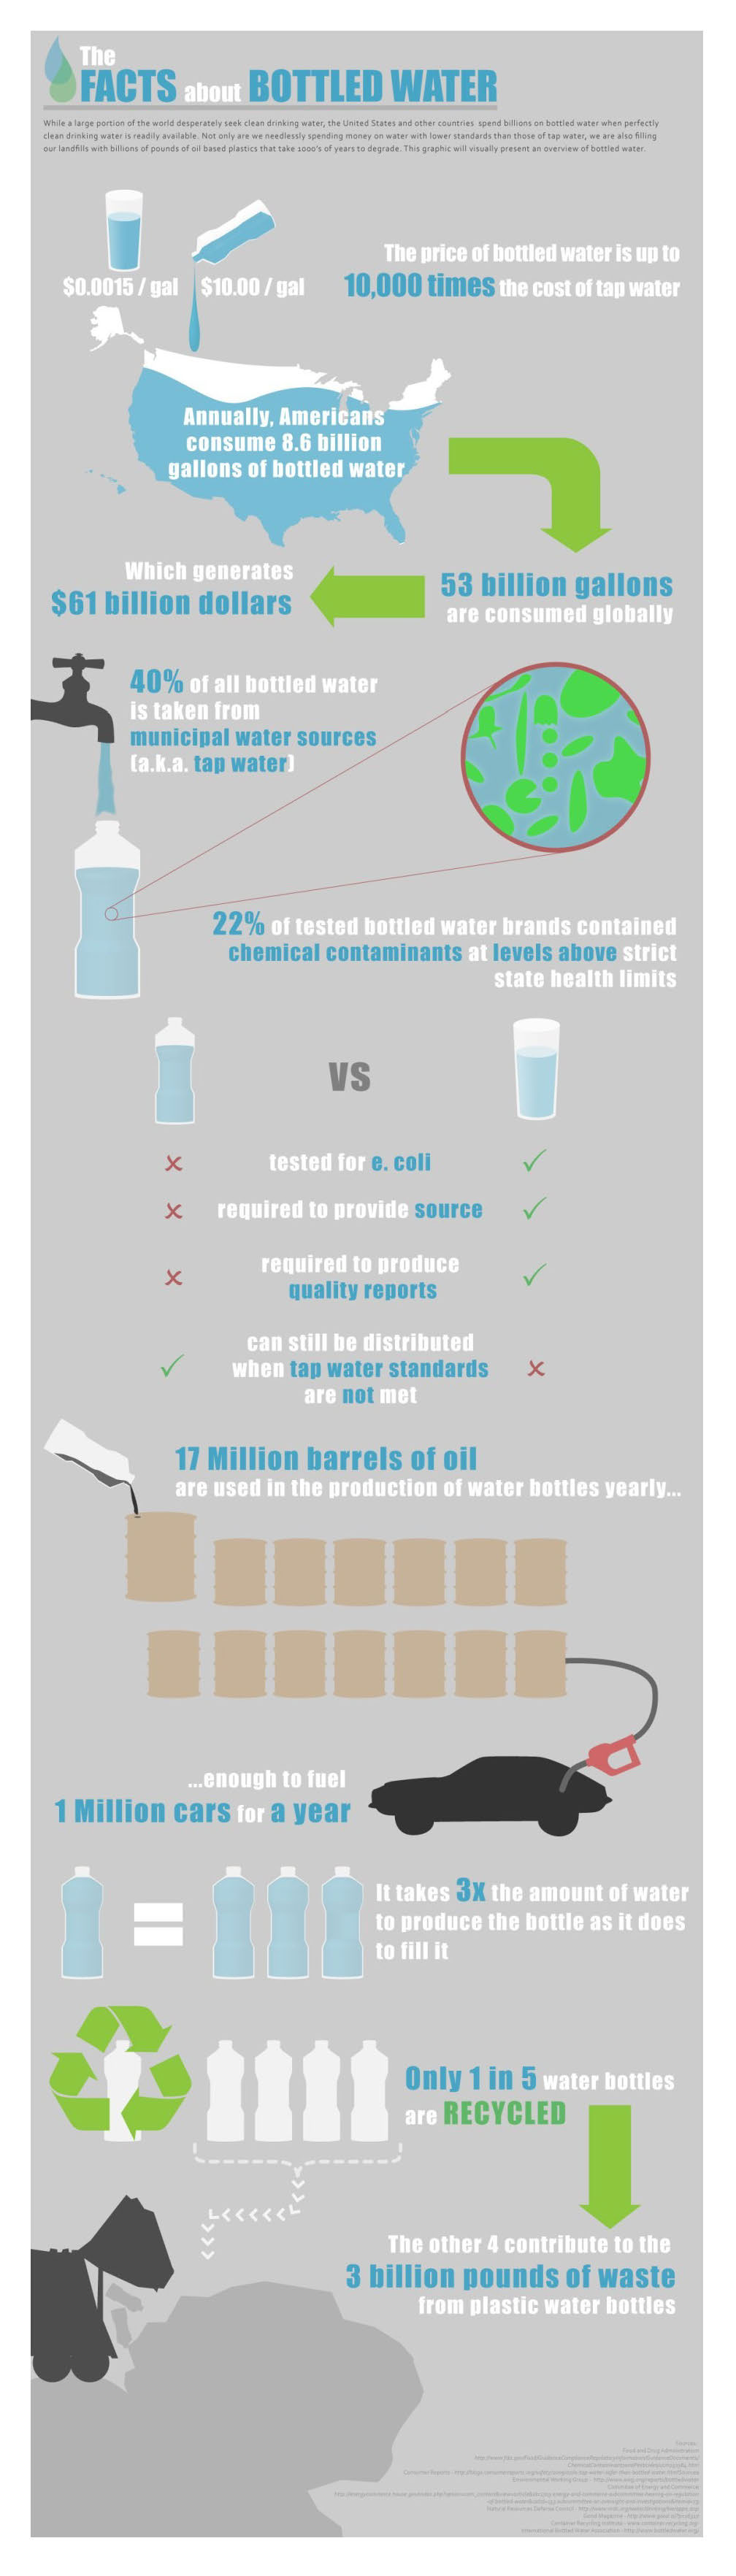 Facts About Bottled Water